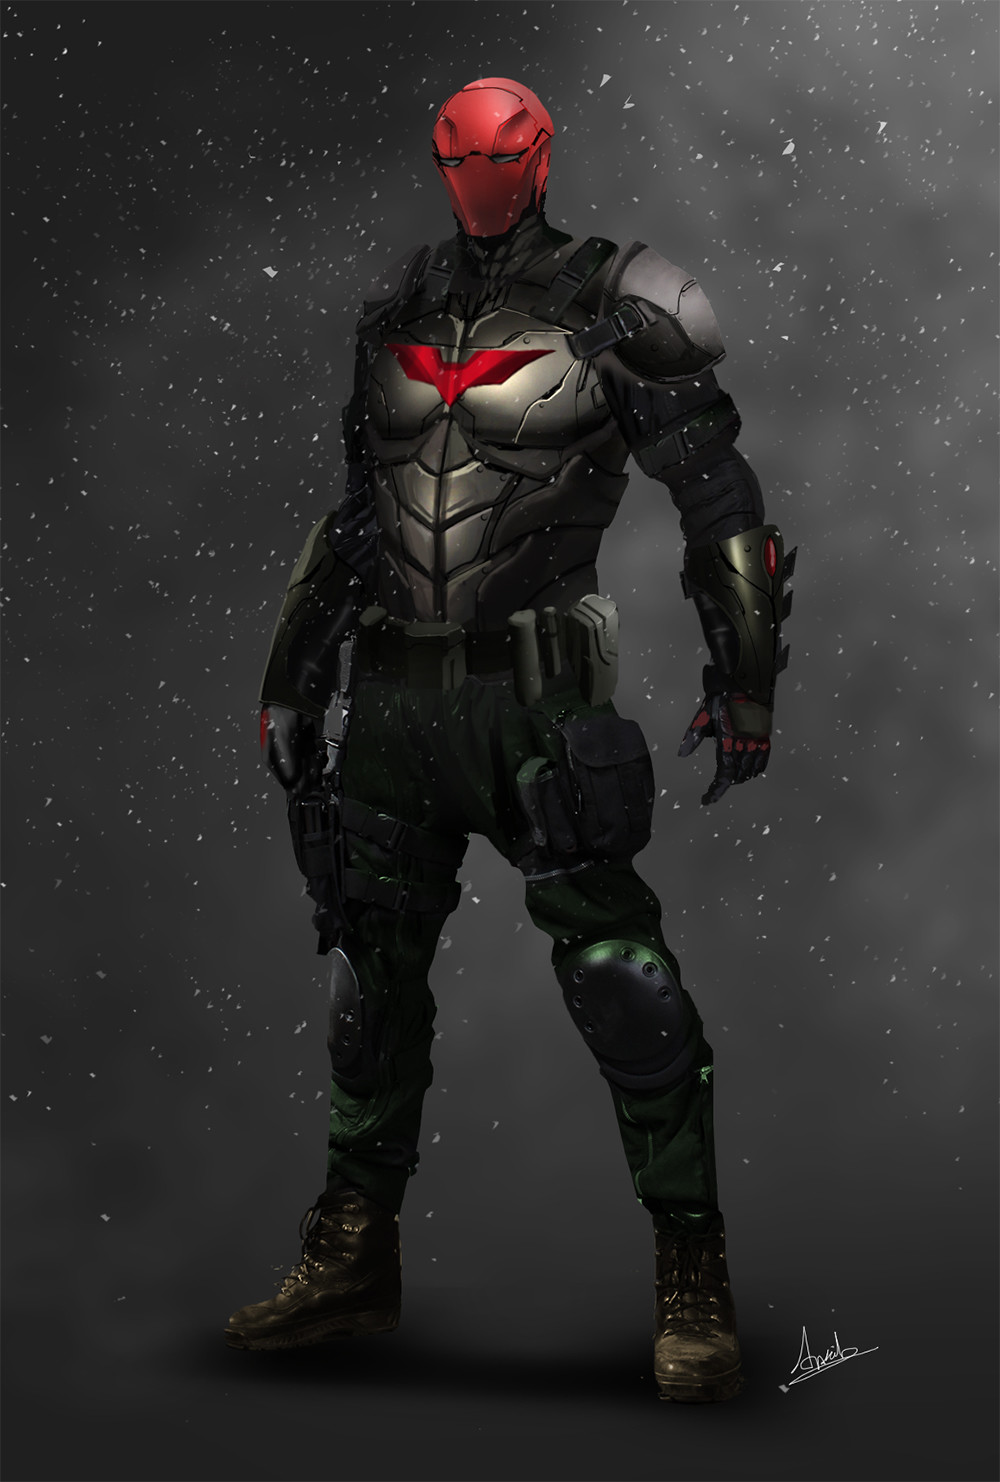 Red hood concept and design.